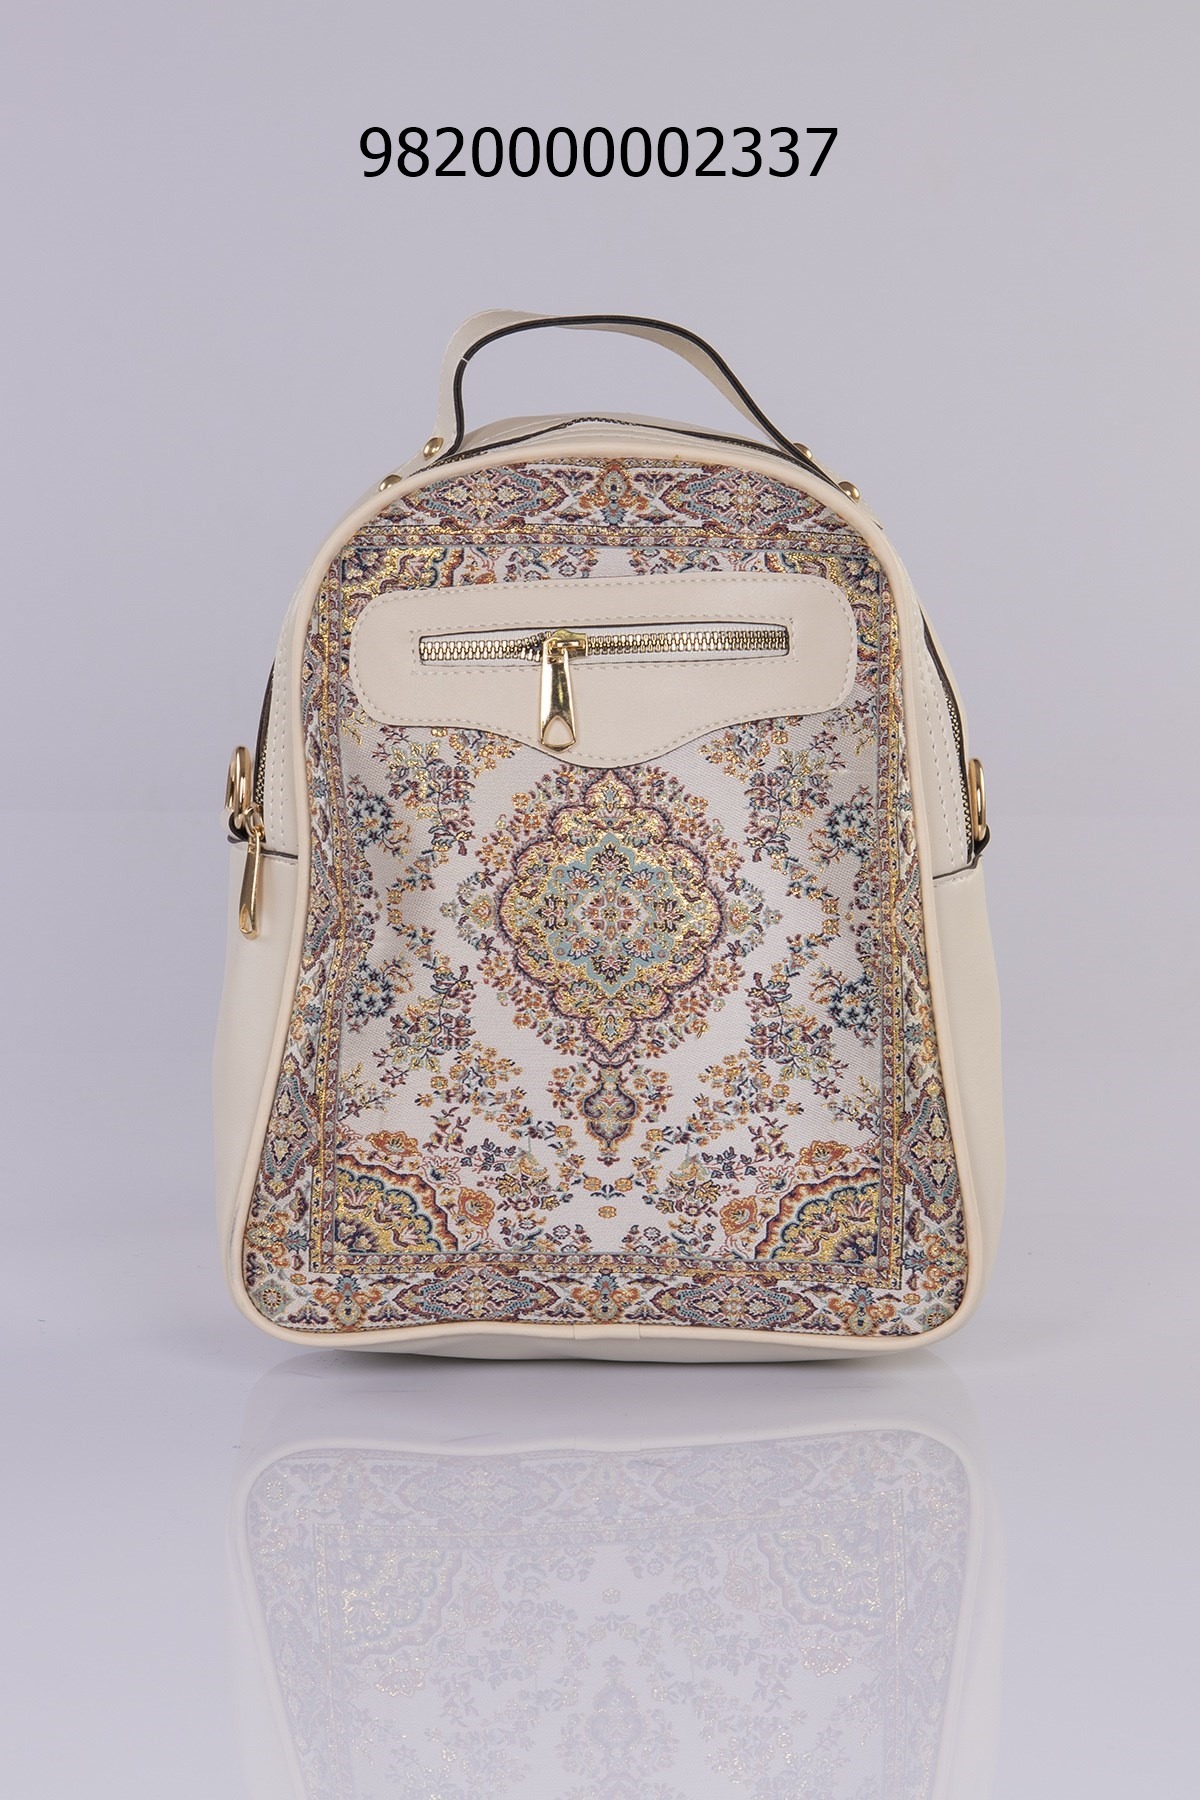 Tribal Vintage Hippie Colorful Travel Backpack Bag For Women Embroidery Pom  Charm Hmong Ethnic Bohemian Boho Rucksack SYS-597